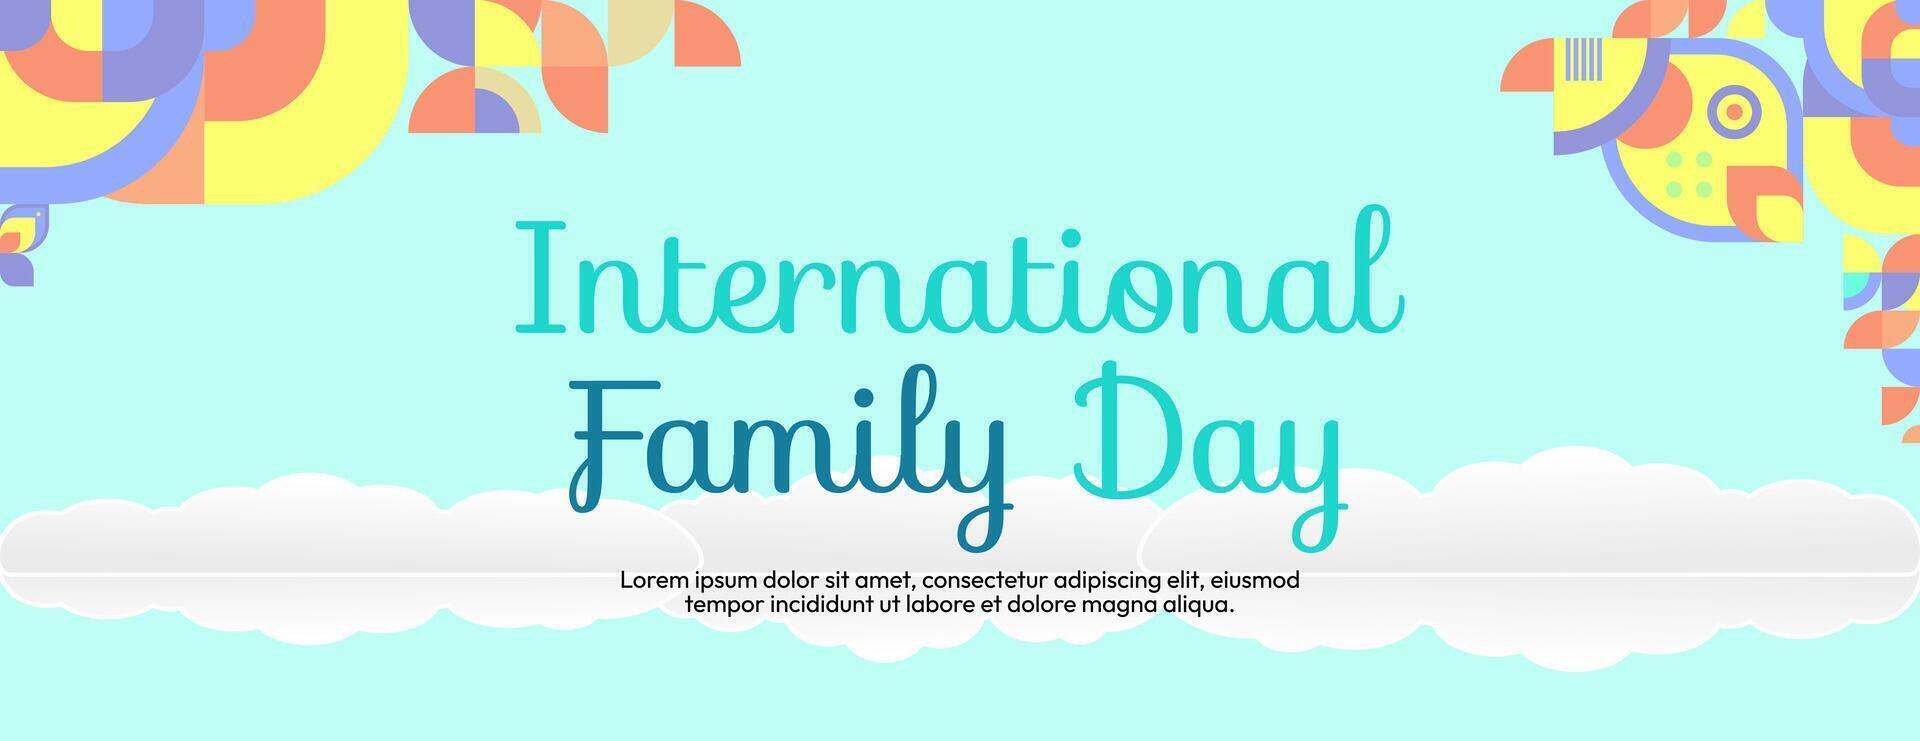 International Family Day wide banner. Modern geometric abstract background in colorful style for family day. Happy family day greeting card cover with text and empty space vector